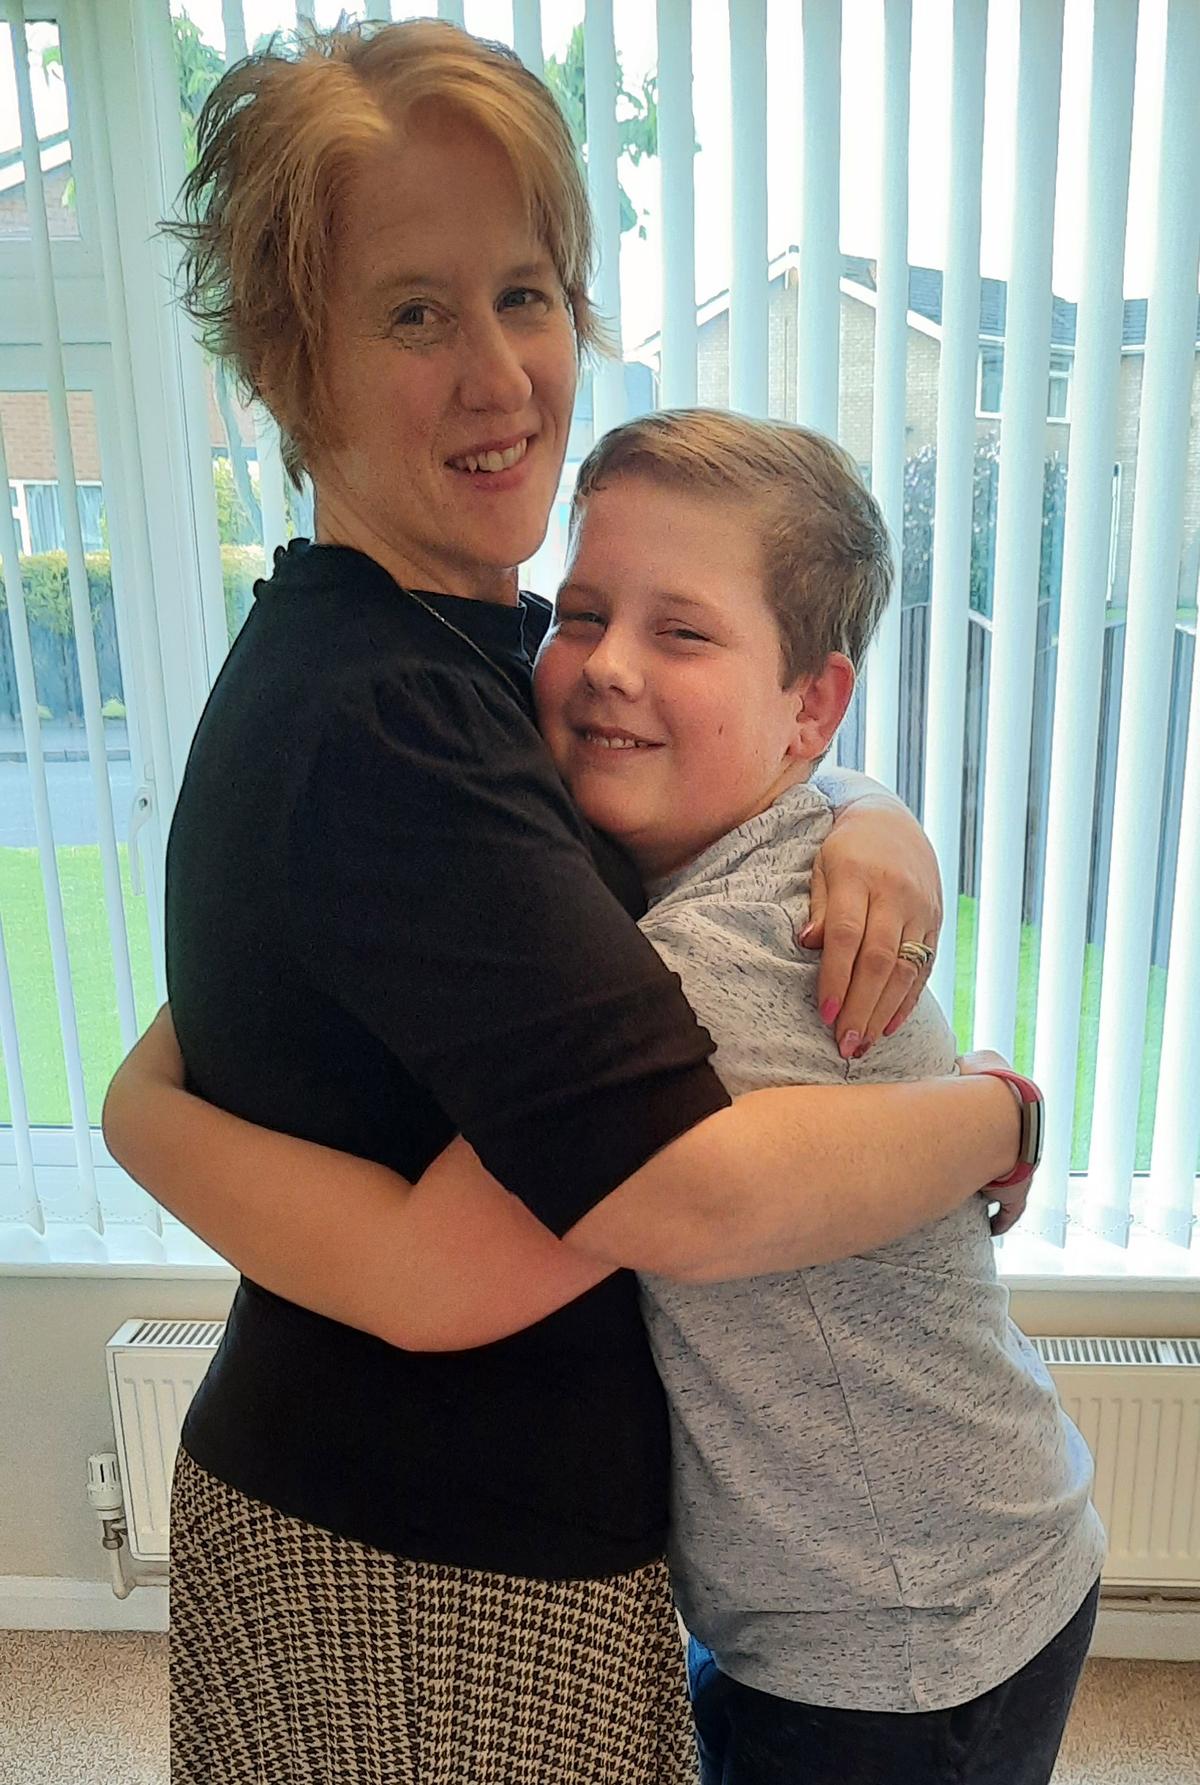 Sarah Stanley with her son after losing weight. (Caters News)